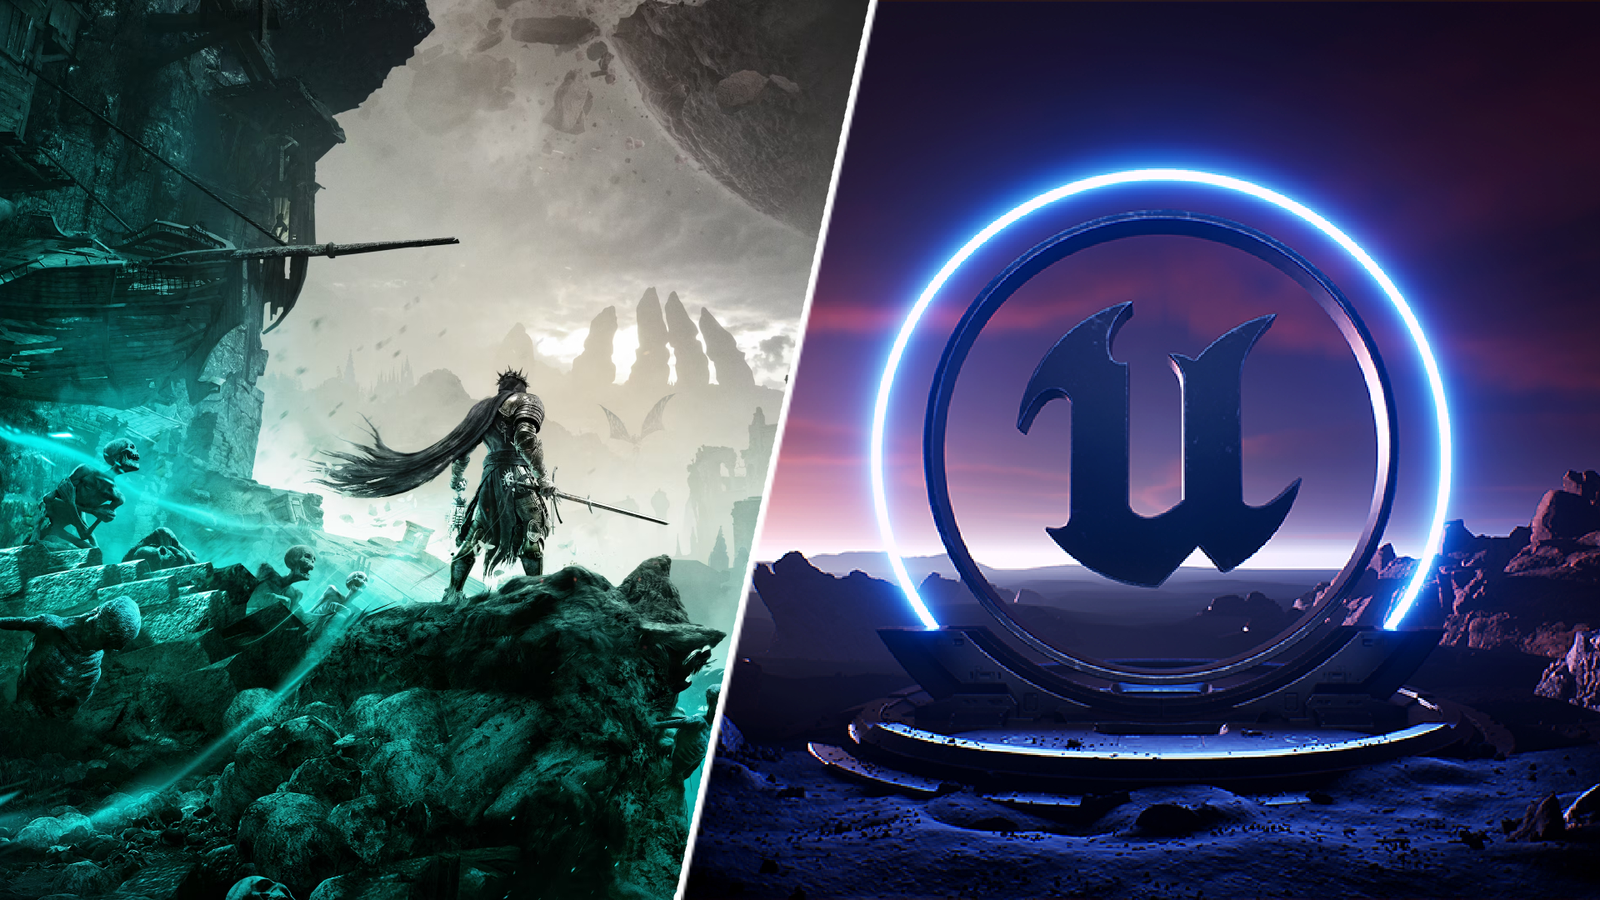 New UNREAL ENGINE 5 Games like Dark Souls coming out in 2023 